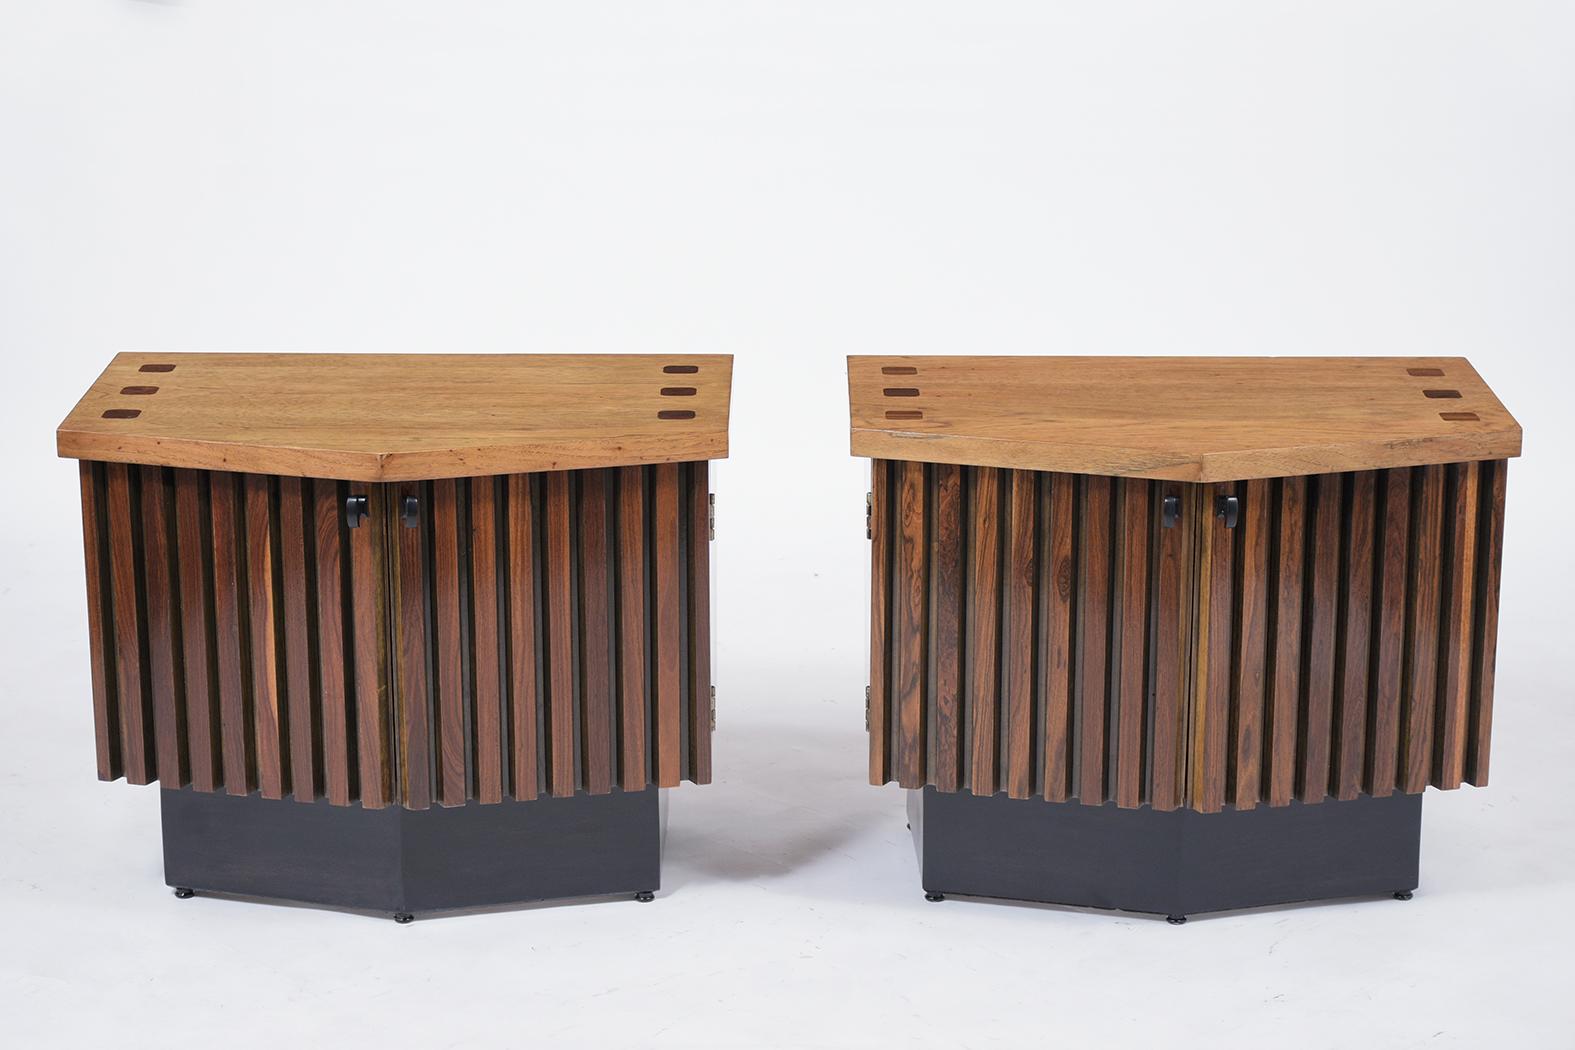 A sleek pair of midcentury nightstands that are made out of rosewood and mahogany that is newly stained in walnut and ebonize color combination and lacquered finish. They feature a flat top with a double door center, and the interior has plenty of